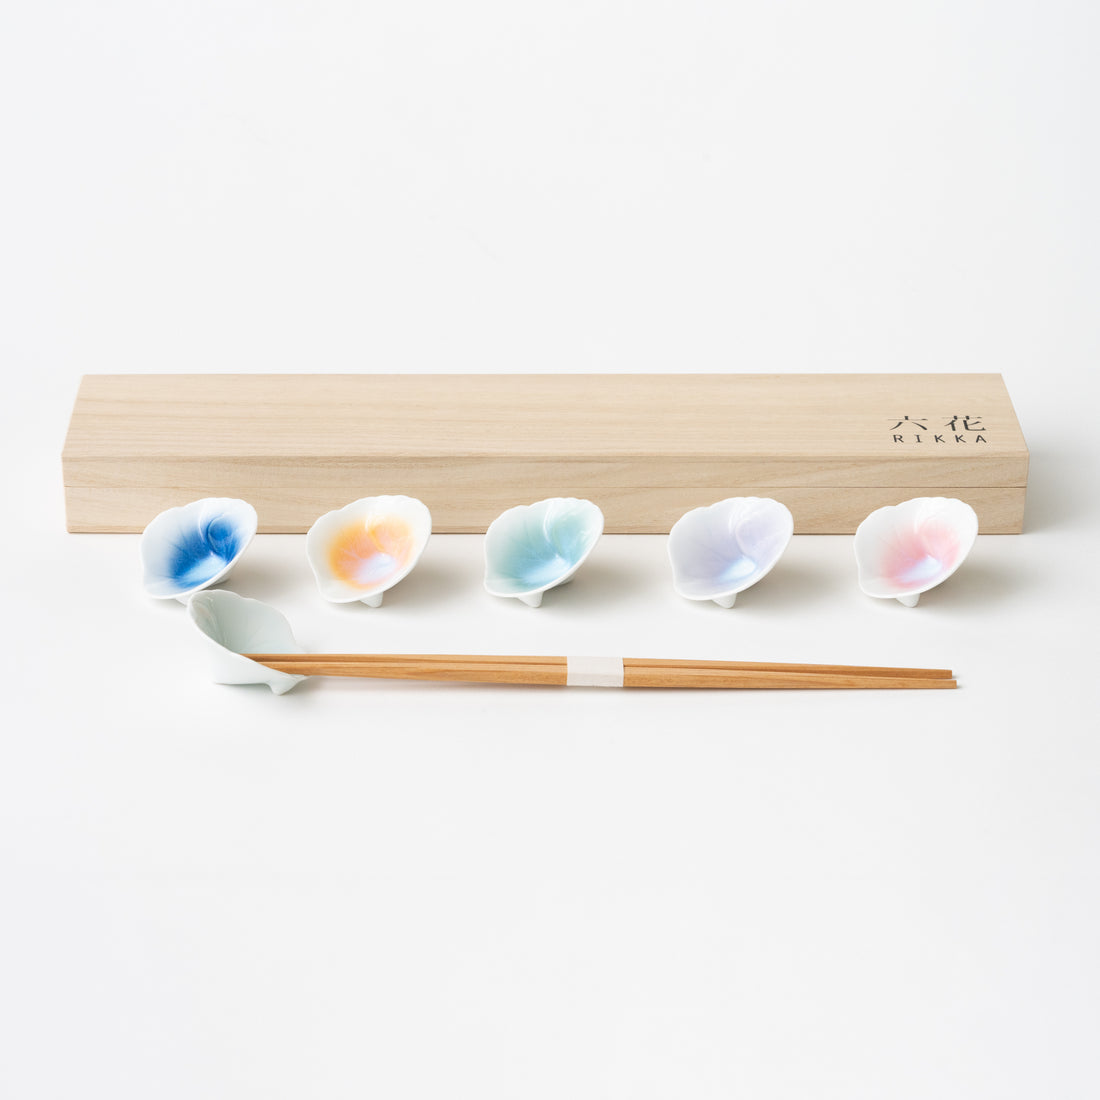 Ceramic chopstick rests in the shape of a flower. Colors in blue, orange, green, pink and lavender. Comes in a wooden box